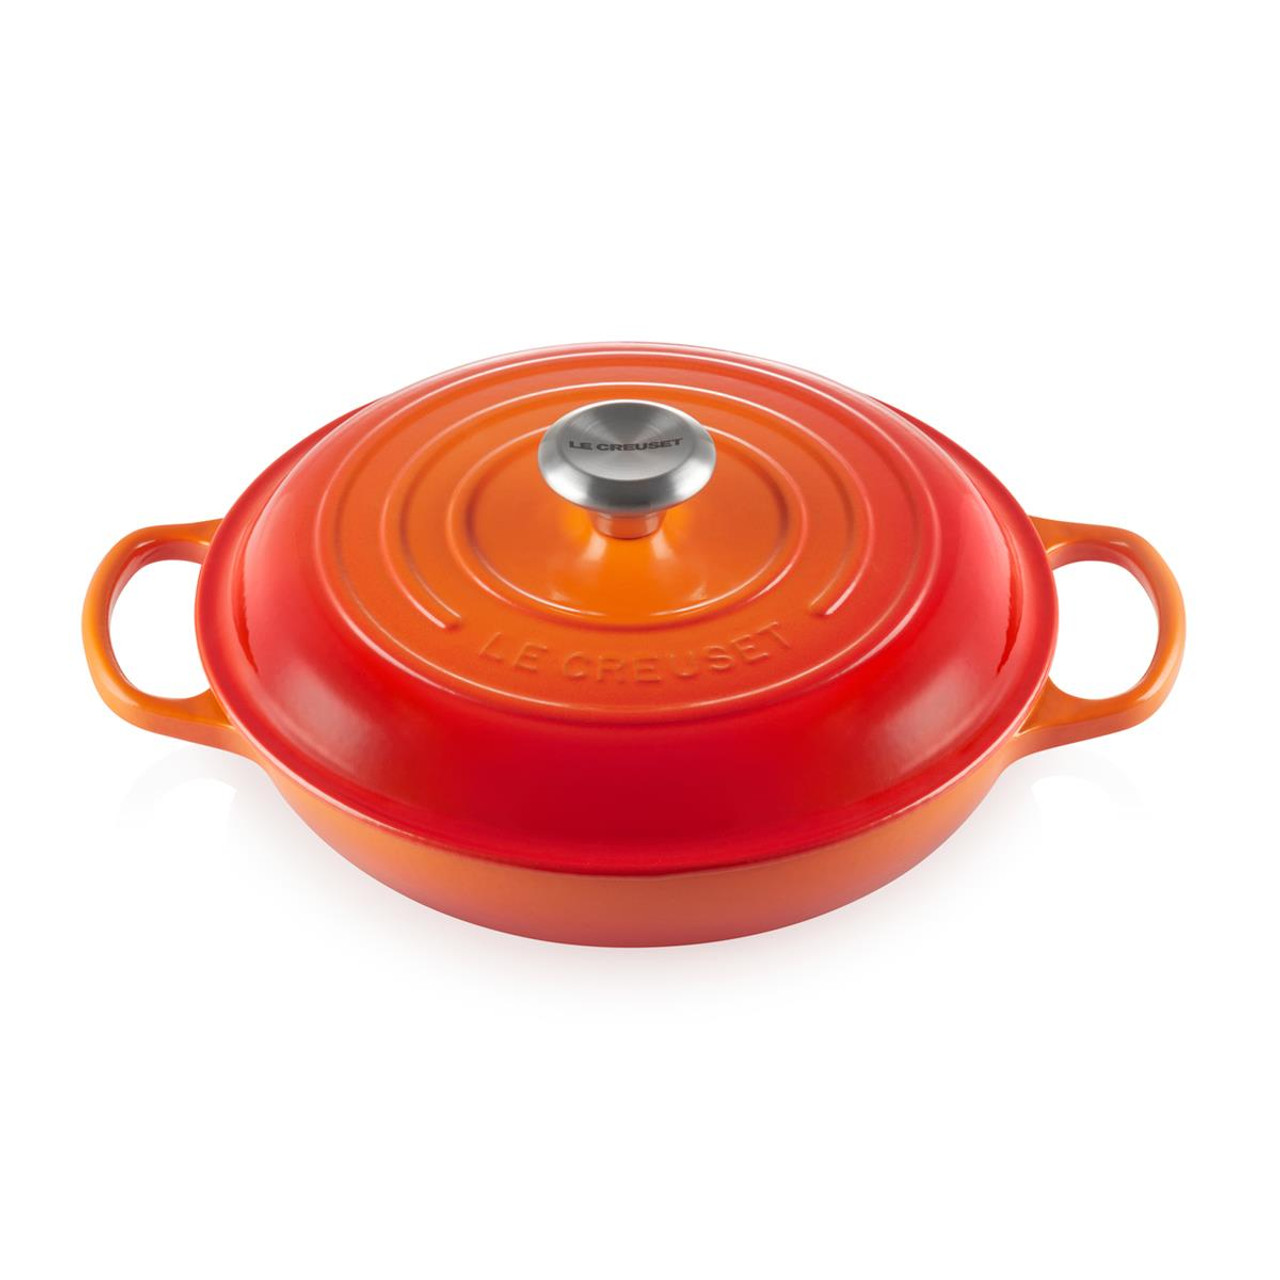 What can I cook in a Le Creuset shallow casserole?